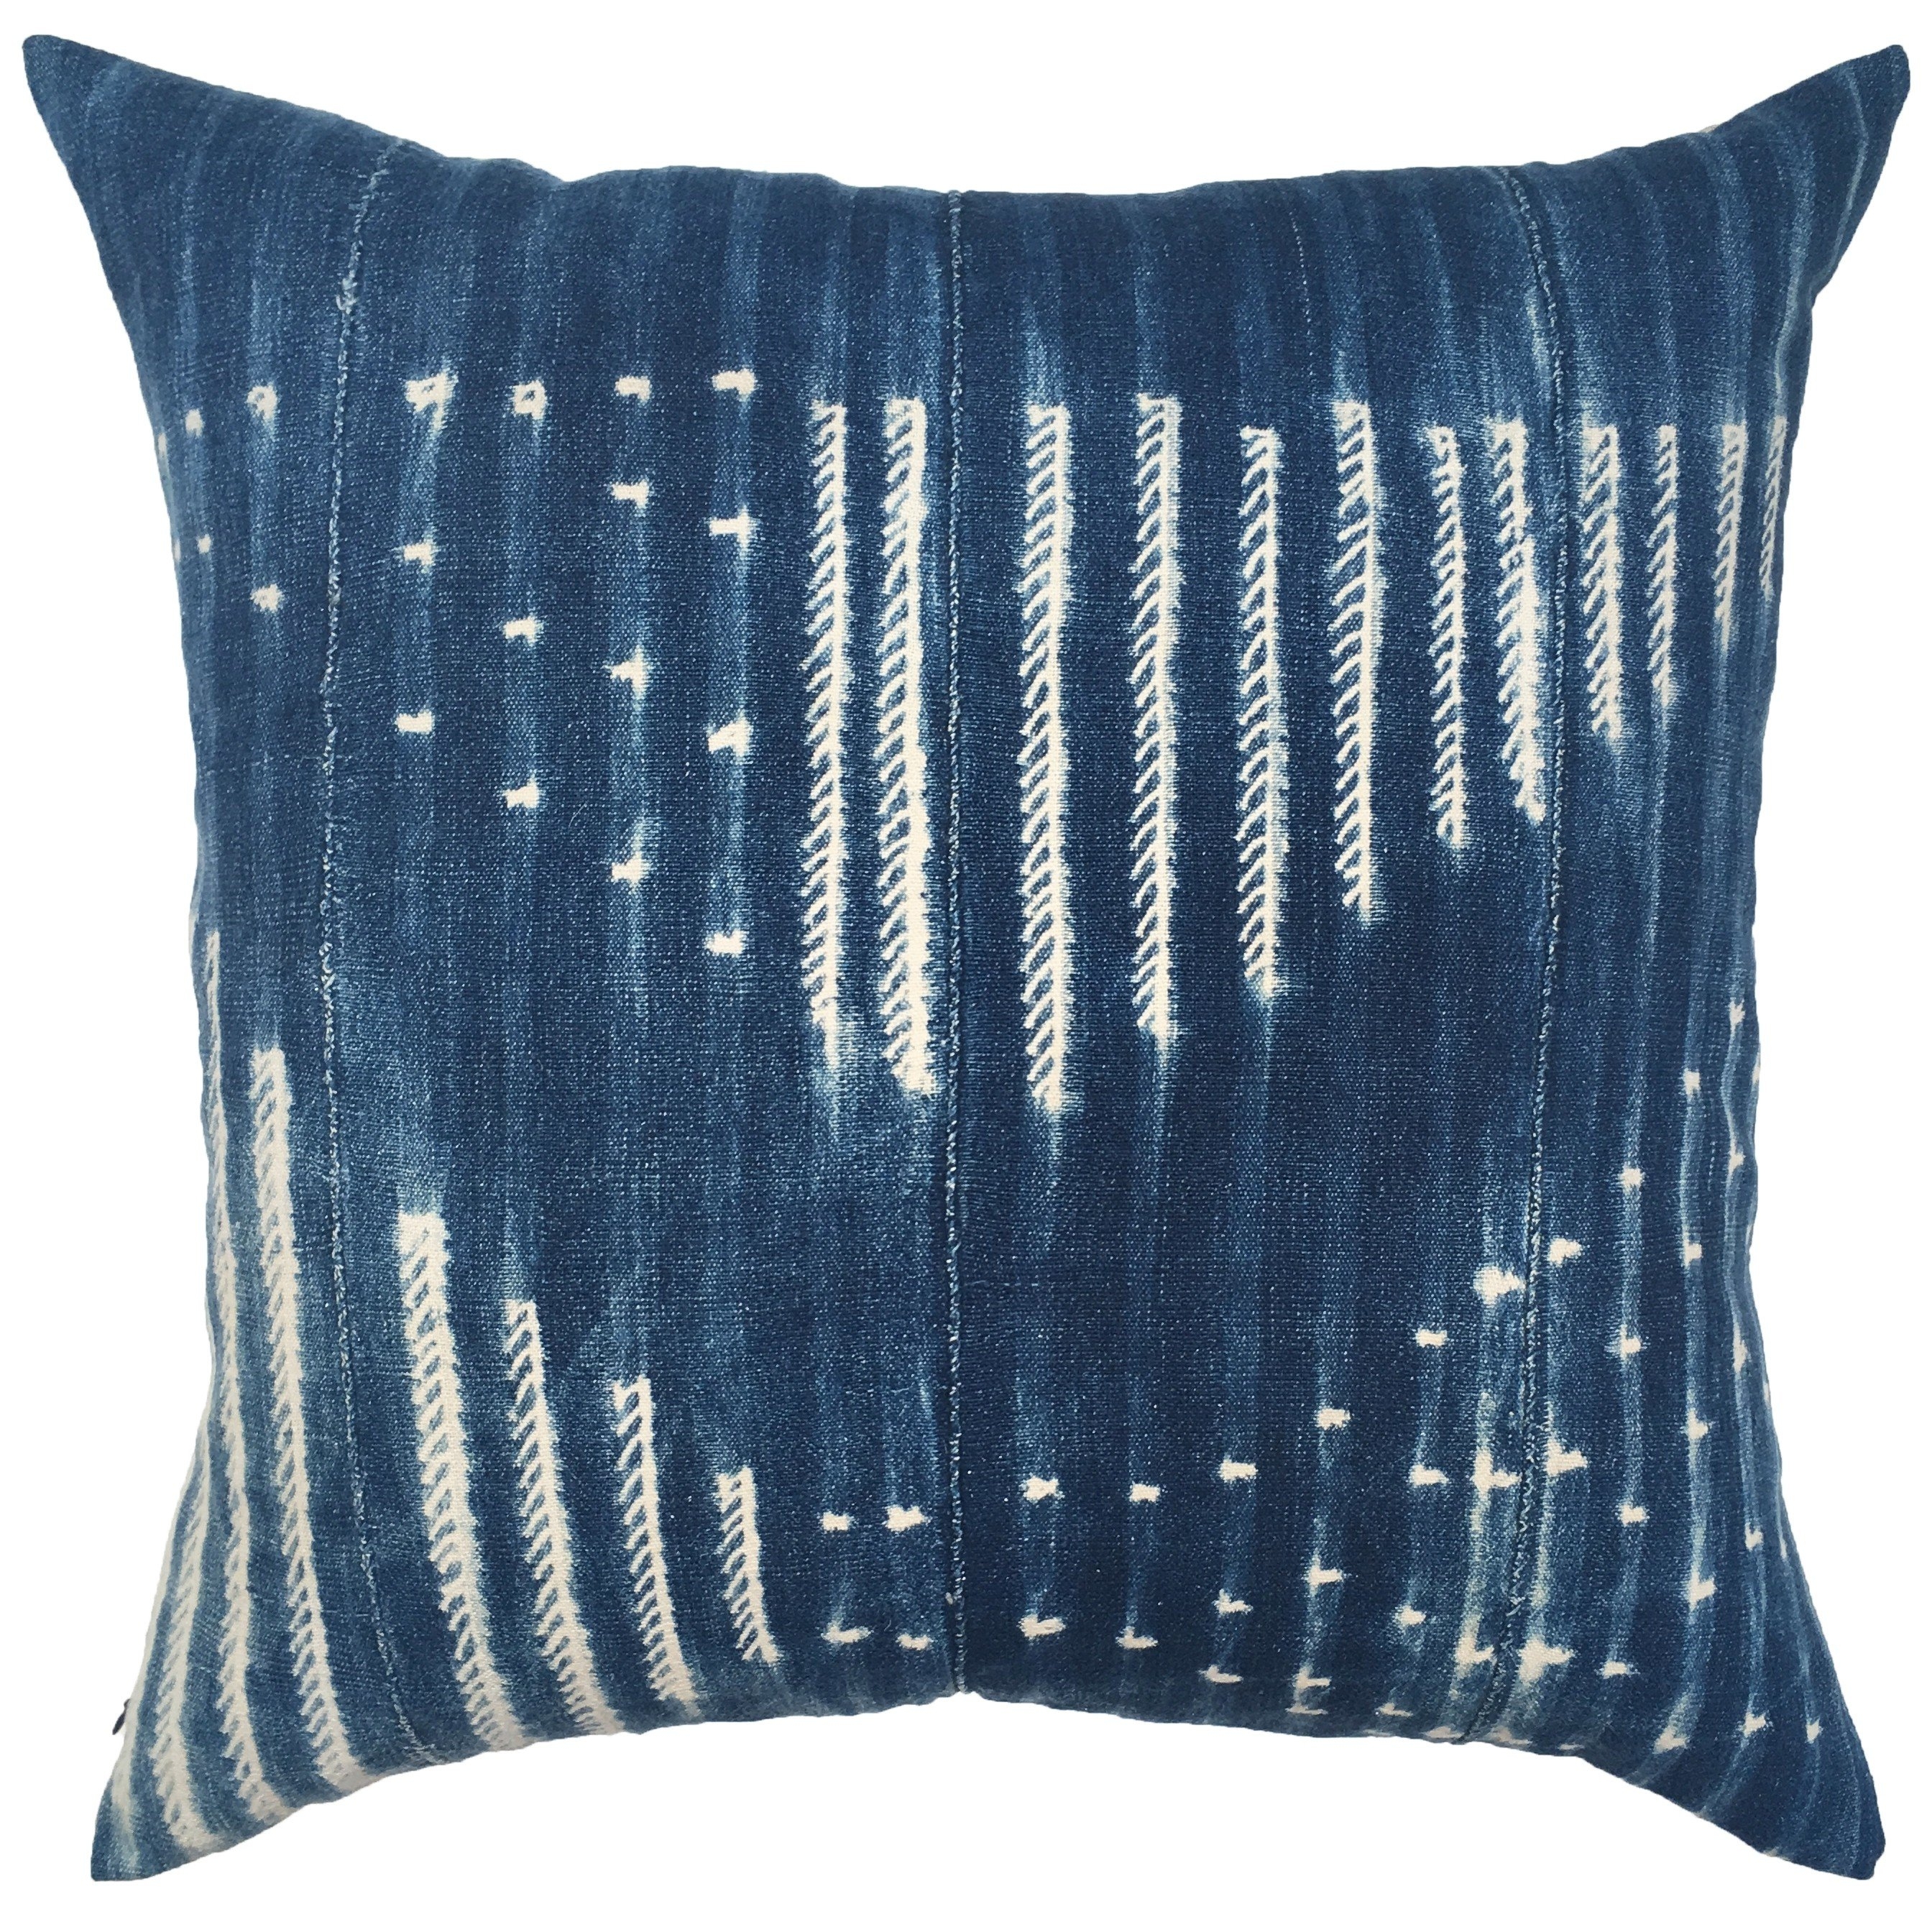 Yadira One of a Kind Indigo Mudcloth Pillow *includes down insert - Image 0